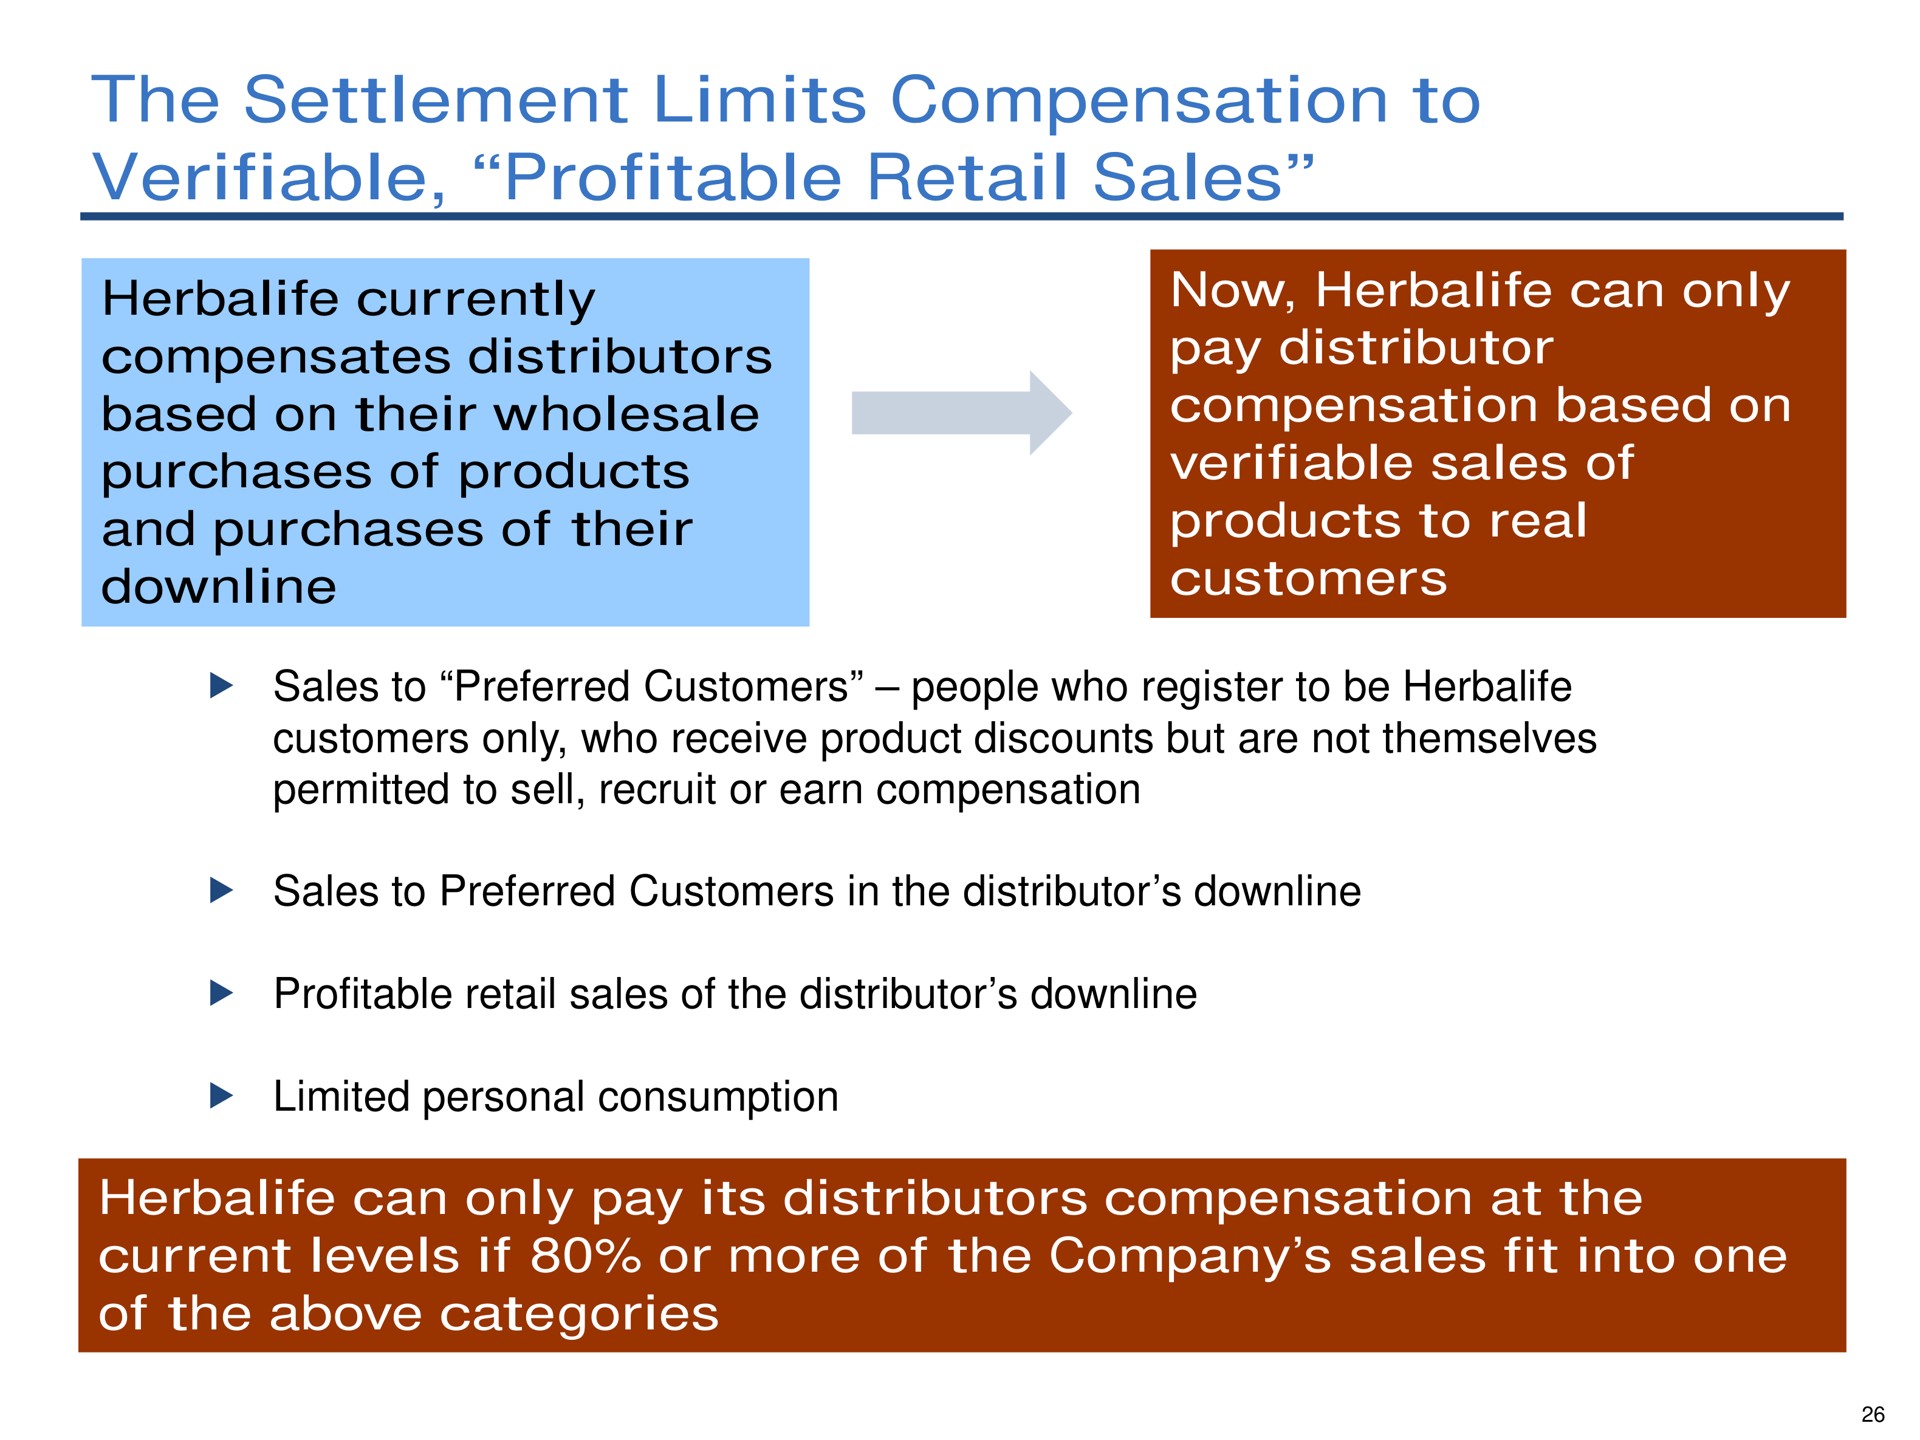 the settlement limits compensation to verifiable profitable retail sales compensates distributors based on their wholesale purchases of products pay distributor based on of | Pershing Square